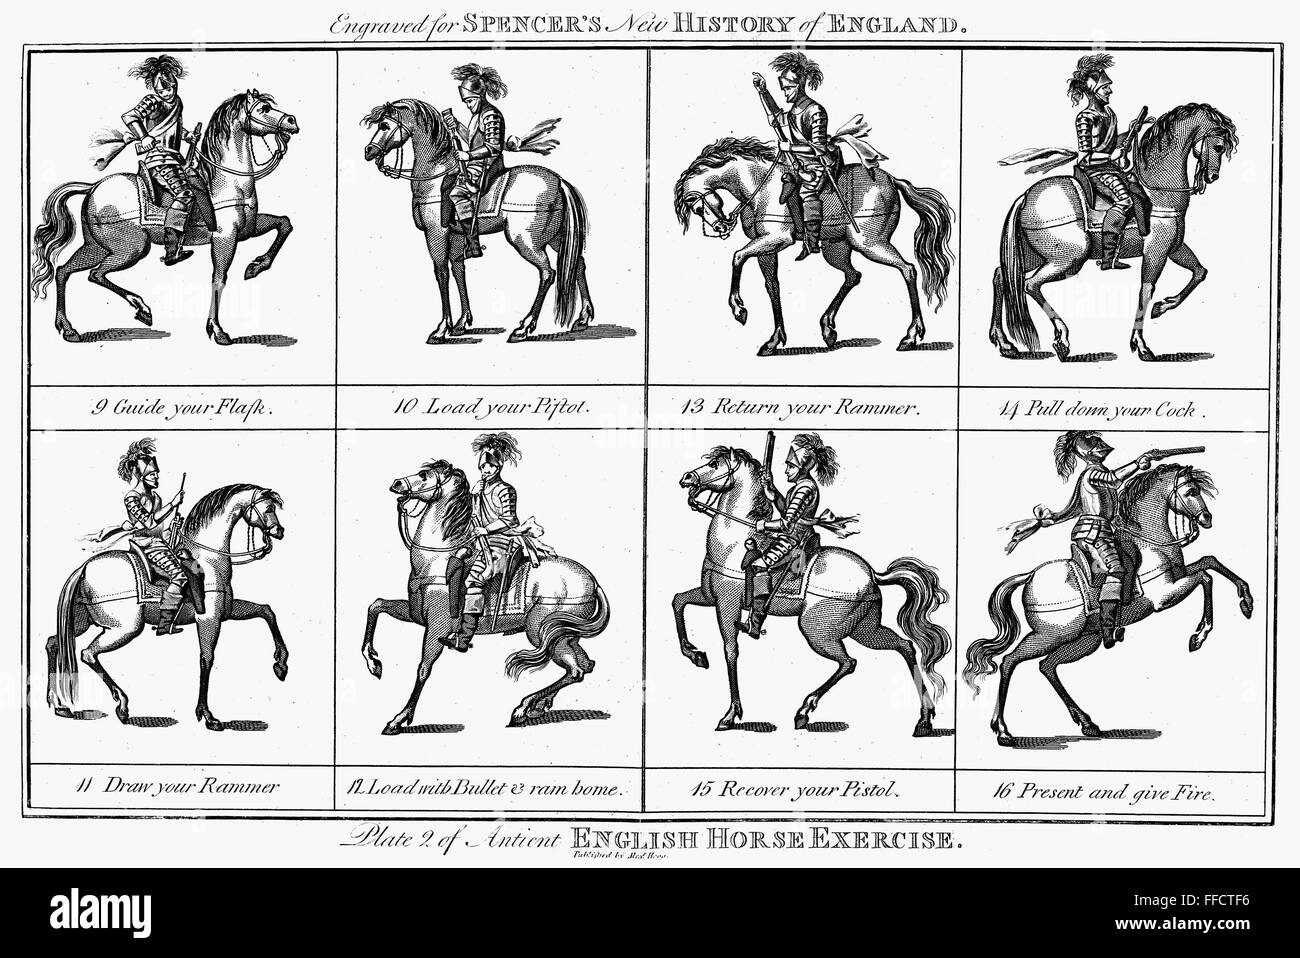 ENGLISH HORSE EXERCISE. /n'Antient English Horse Exercise.' Line engravings from Spencer's New, Authentic, and Complete History of England,' 1794. Stock Photo